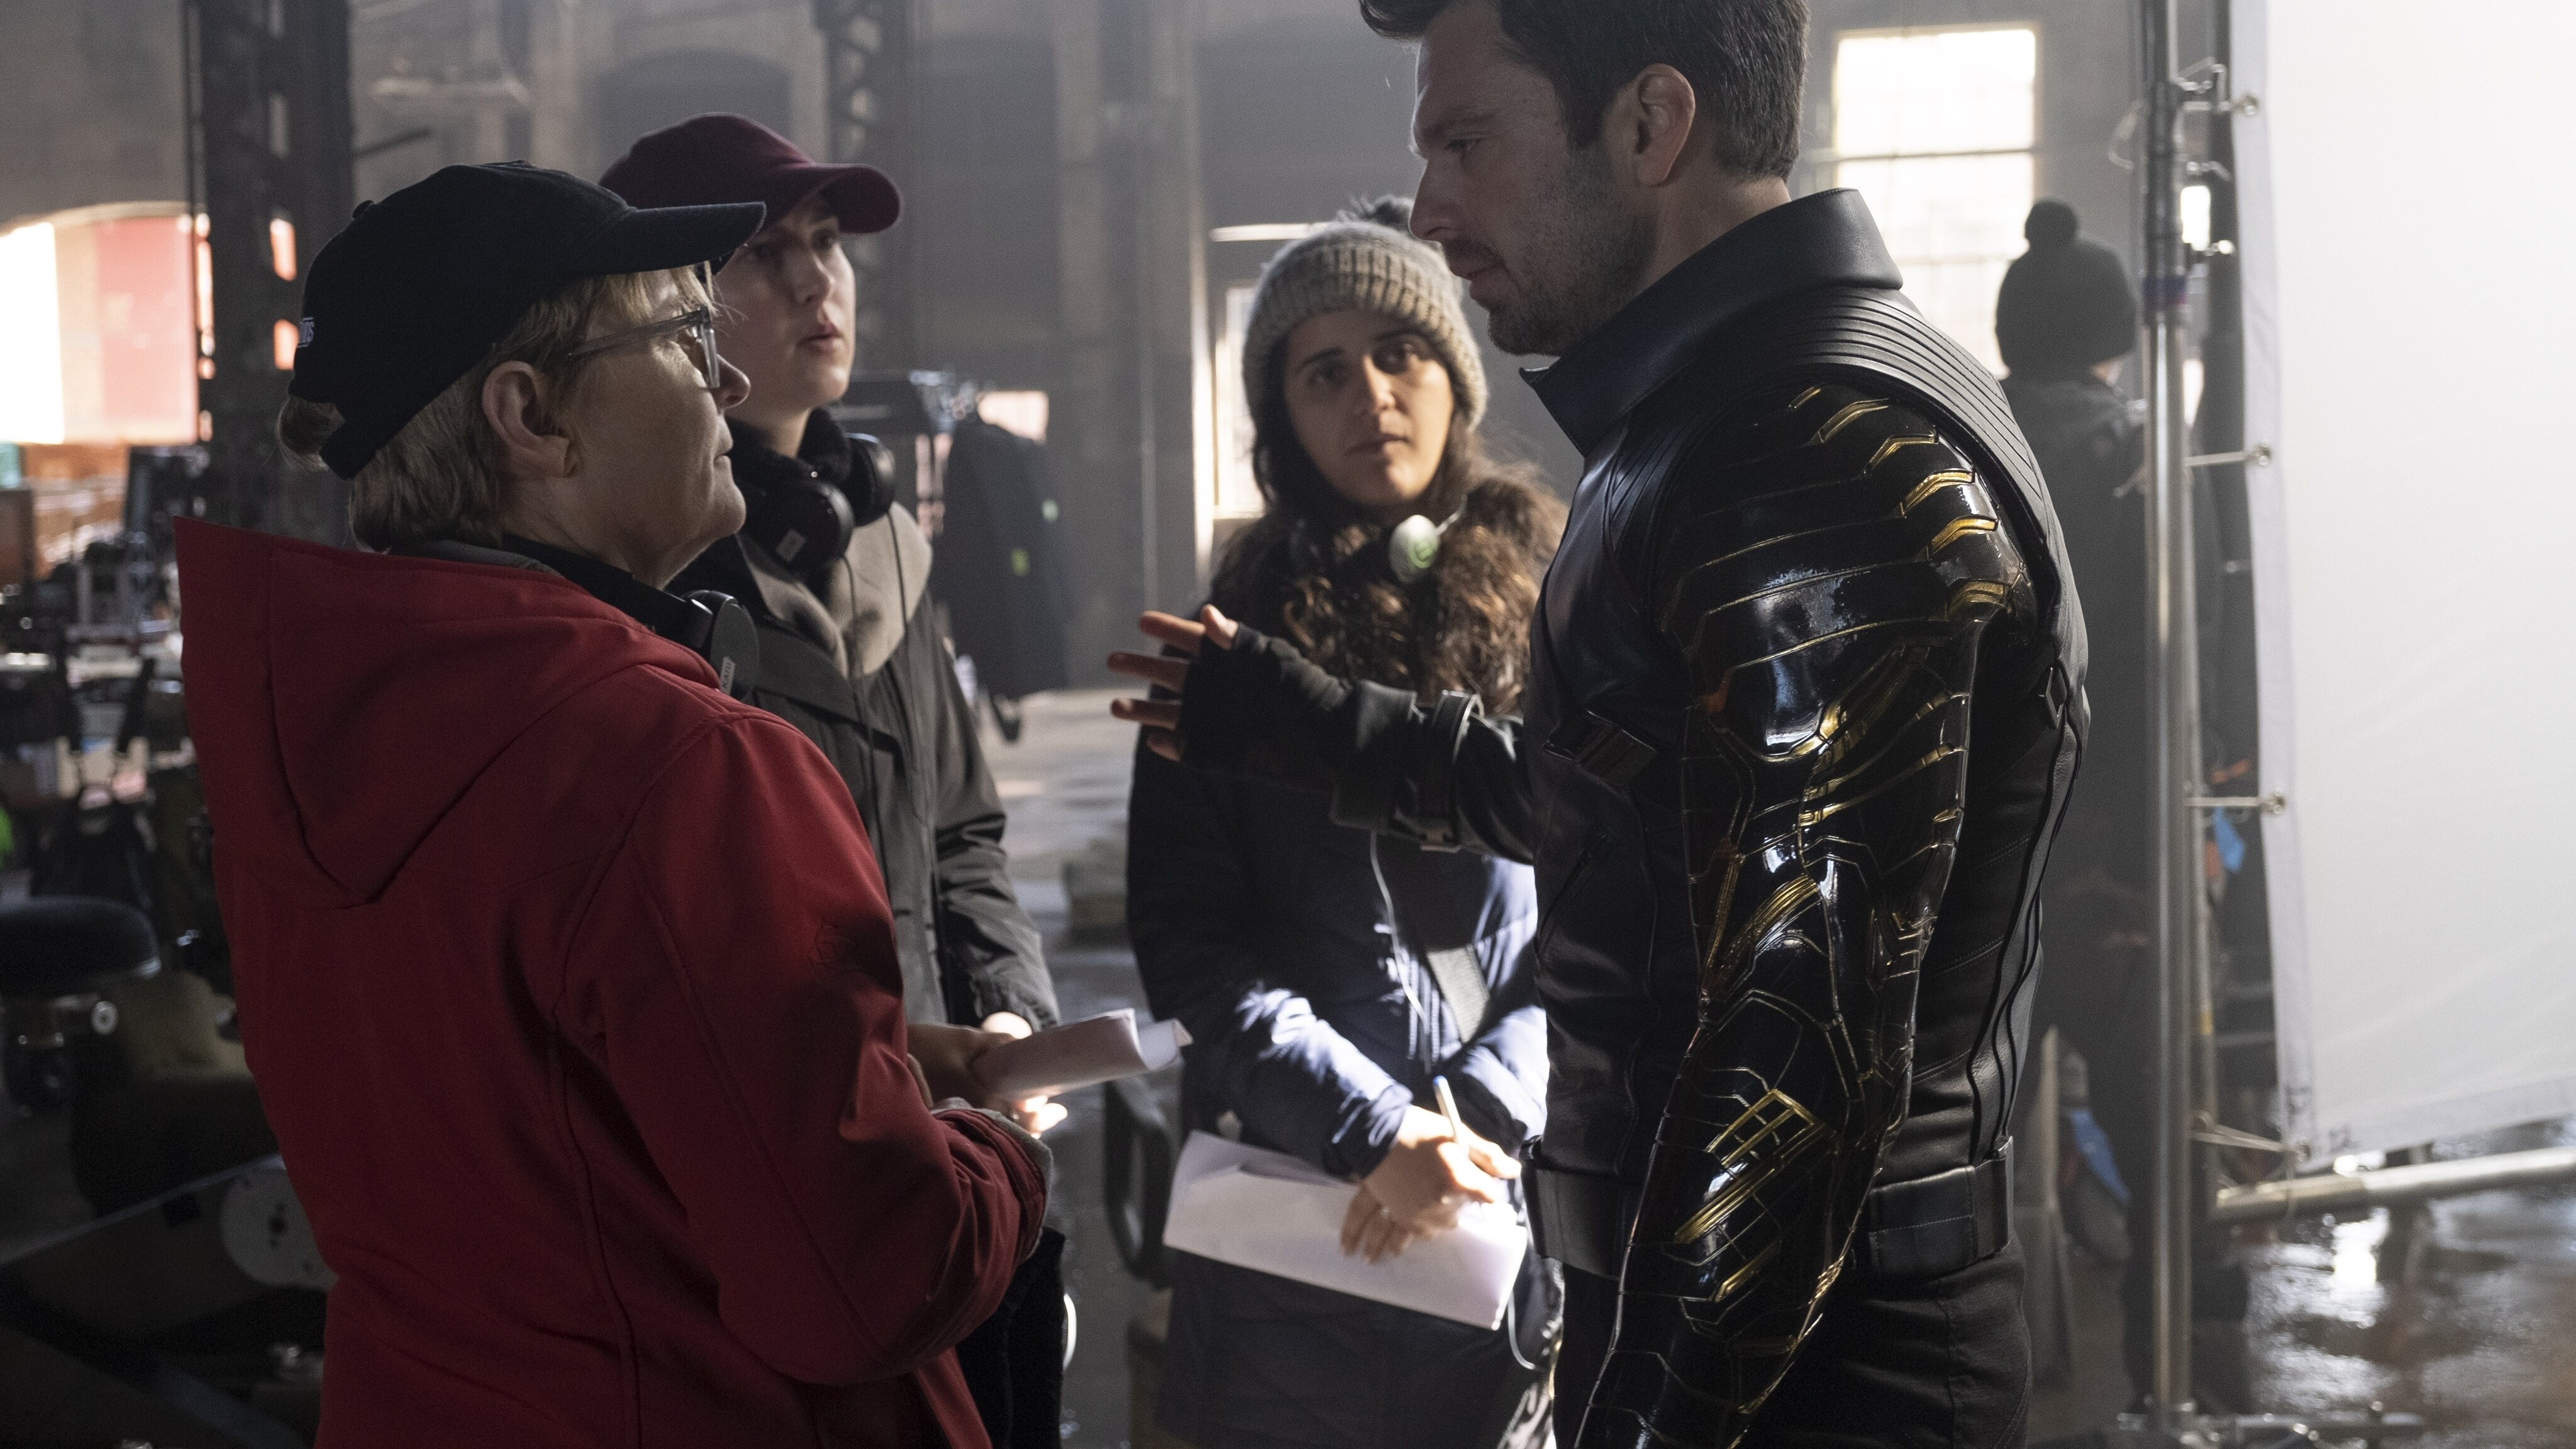 (L-R): Director Kari Skogland and Winter Soldier/Bucky Barnes (Sebastian Stan) on the set of Marvel Studios' THE FALCON AND THE WINTER SOLDIER exclusively on Disney+. Photo by Chuck Zlotnick. ©Marvel Studios 2021. All Rights Reserved.